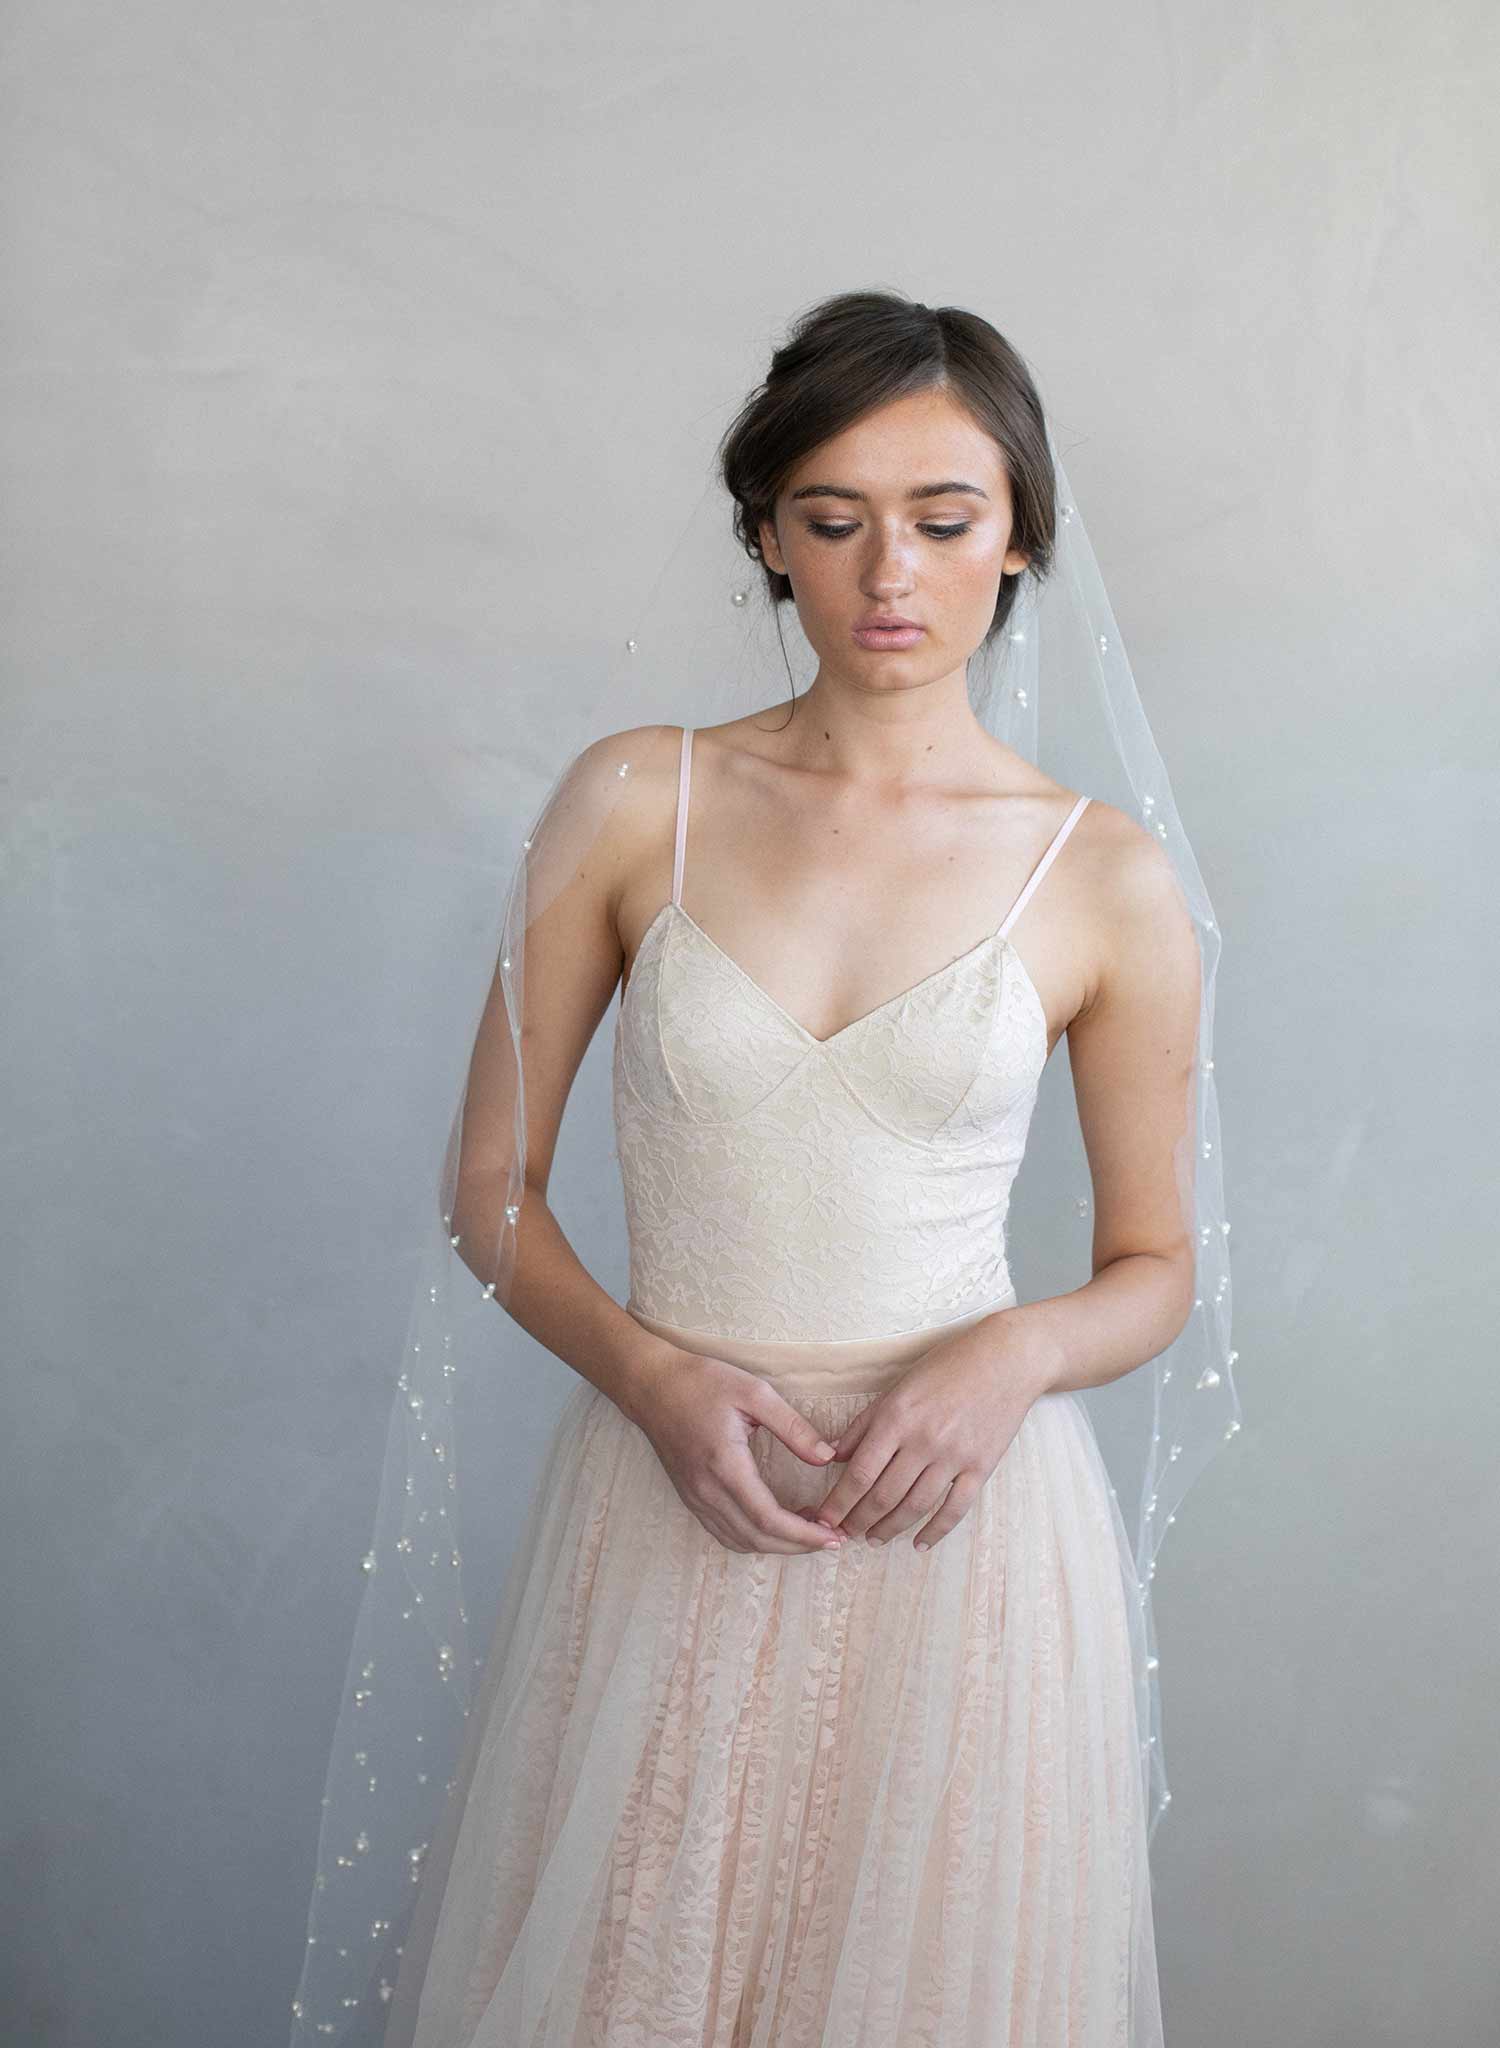 Twigs & Honey Mini Tulle Veil with Pearls - Style #212